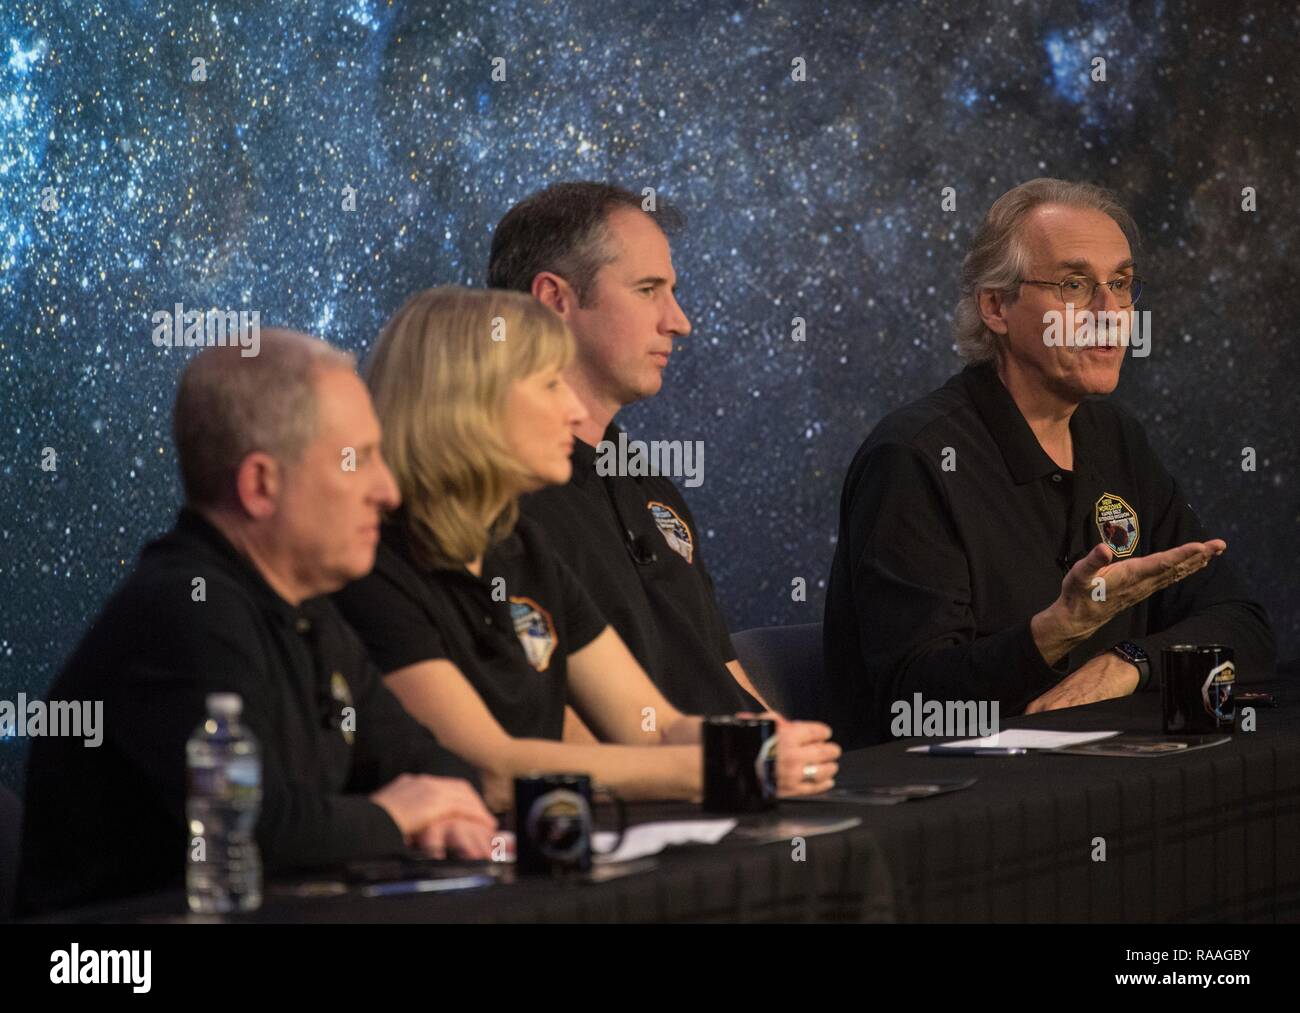 New Horizons co-investigator John Spencer, right, of the Southwest Research Institute during a briefing prior to the expected flyby of Ultima Thule by the New Horizon spacecraft at Johns Hopkins University Applied Physics Laboratory December 31, 2018 in Laurel, Maryland. The flyby by the space probe occurred 6.5bn km (4bn miles) away, making it the most distant ever exploration of an object in our Solar System. Stock Photo